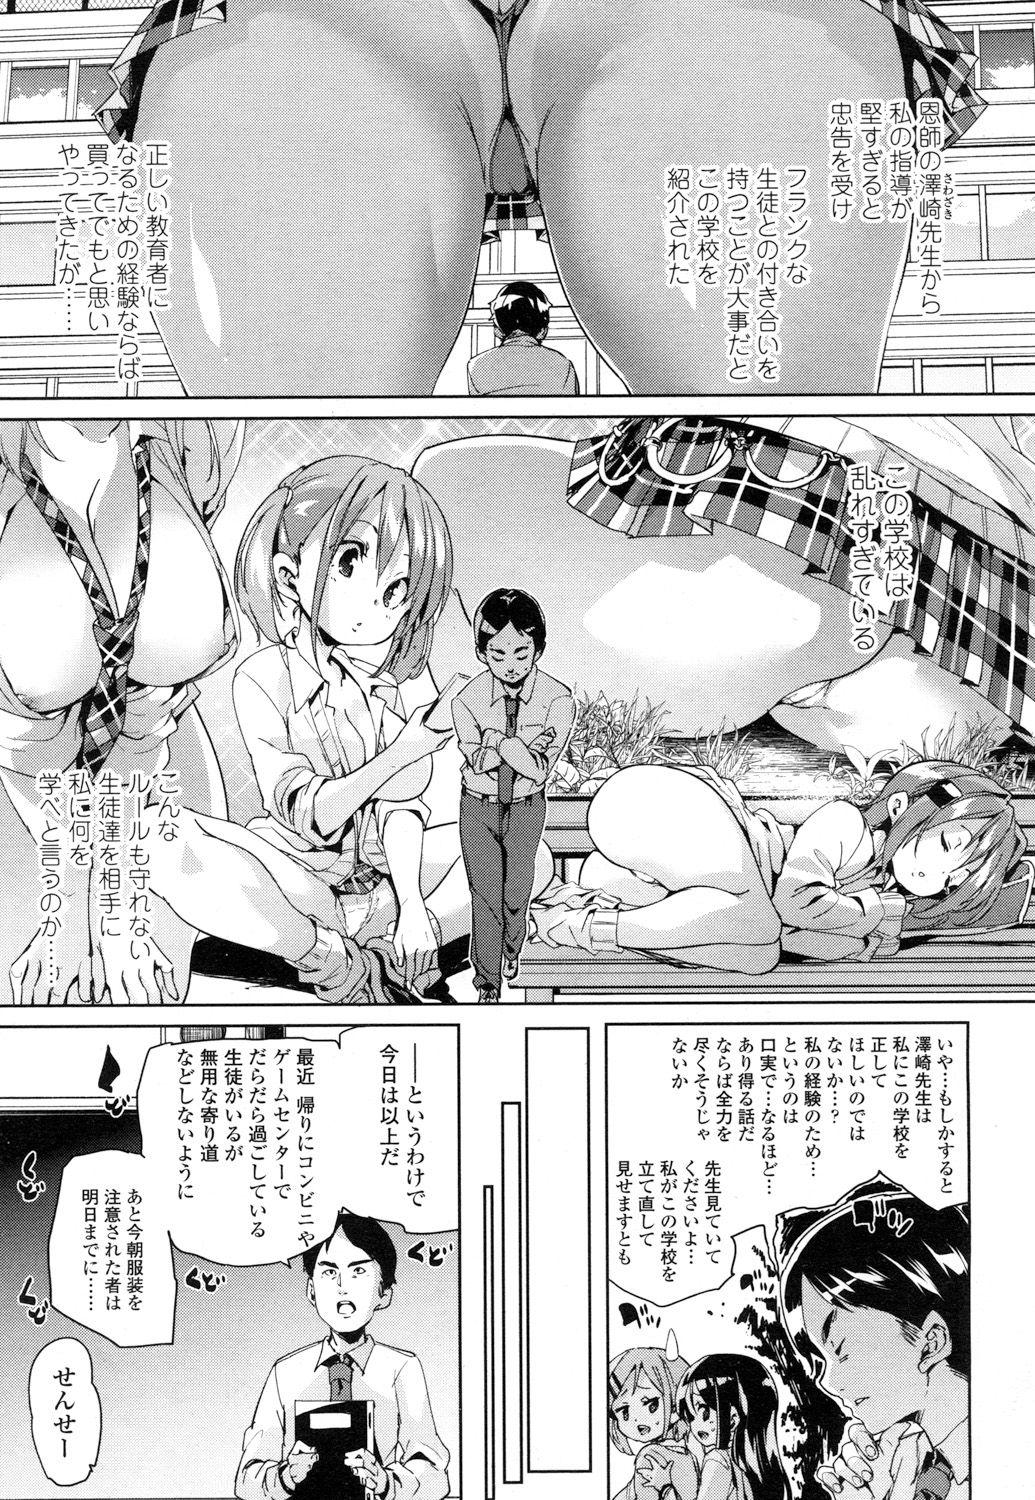 Babe Girls forM Vol. 14 Blond - Page 4